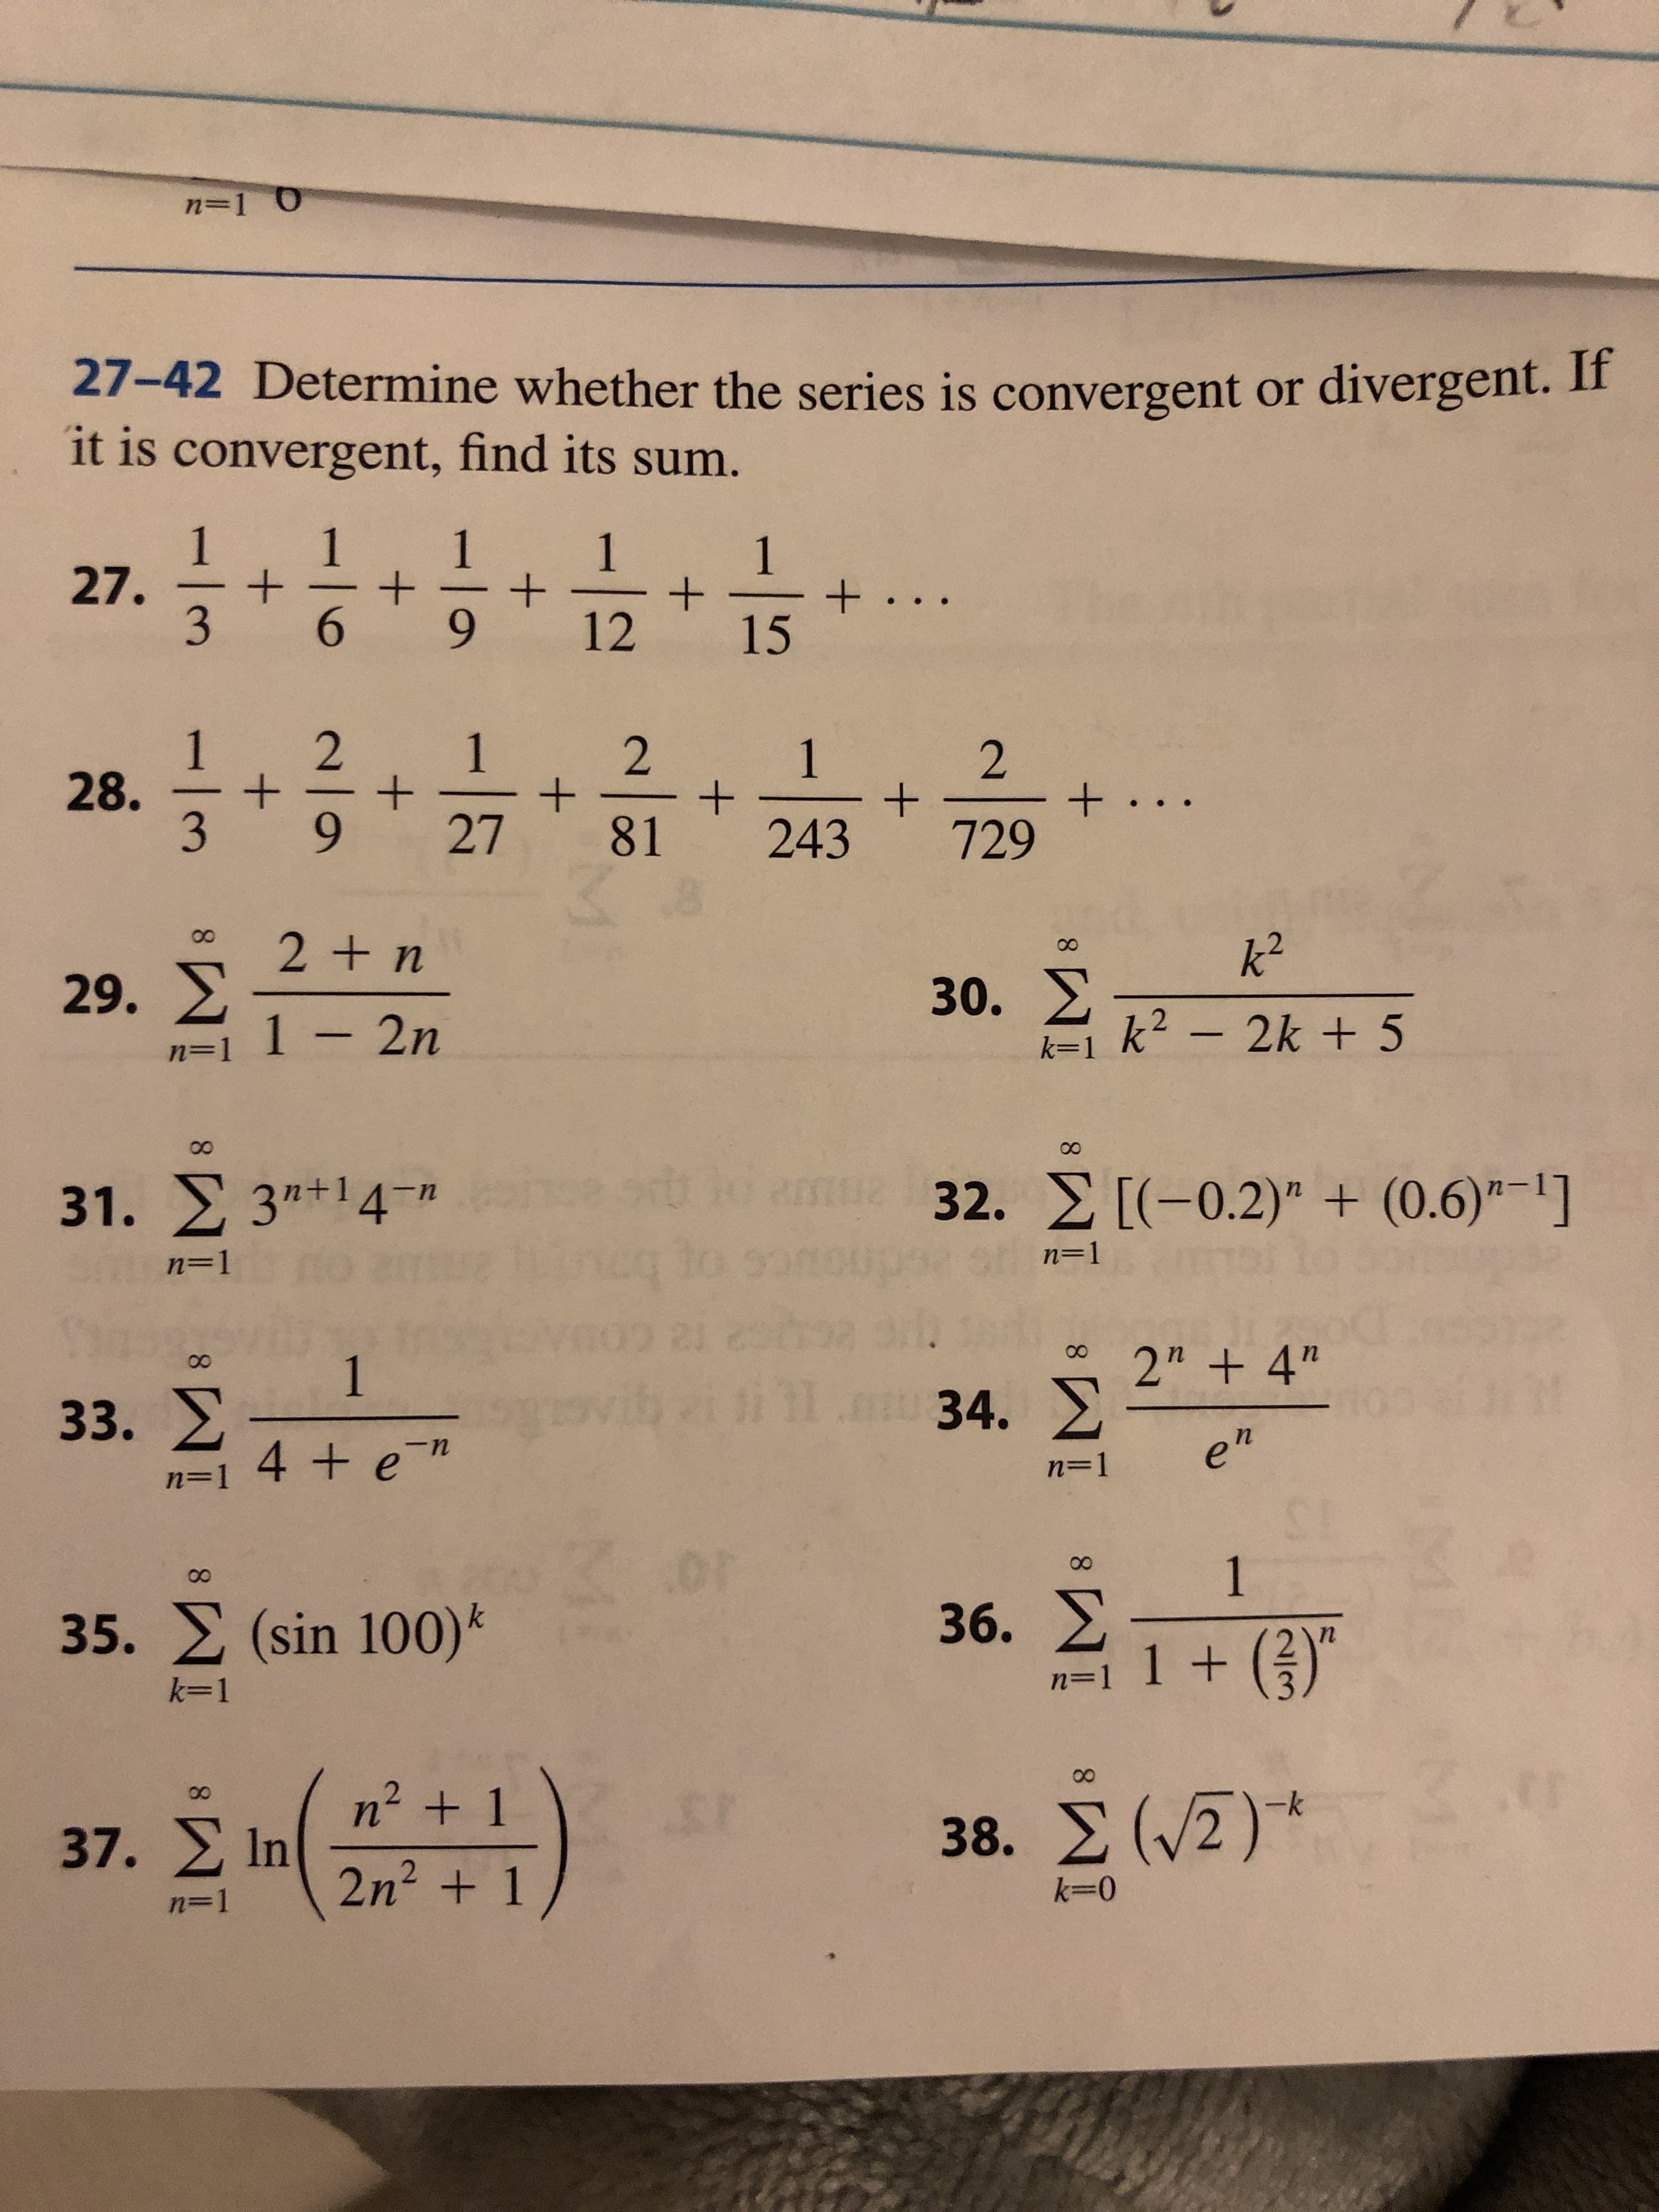 n=1 O
27-42 Determine whether the series is convergent or divergent. If
it is convergent, find its sum.
1
27.
1
1
+
12
1
+ . . .
15
2
+
81
1
2
+ ...
729
28.
+
+
+
3
27
243
2 + n
k2
29.
30.
k2-2k+5
1 2n
k-1
n=
00
00
32.[(-0.2)" + (0.6)-]
31. 3" 14n
n-1
n=1
21
11.
2" +4"
1
33.X
34.X
n
4 + e "
n=1
n-1
ST
1
36.X
A-1 1+
DF
35. (sin 100)
k-1
+ 1
n2
38. (2)
37. In
n 1
2n2 1
k 0
-12
2/
+
